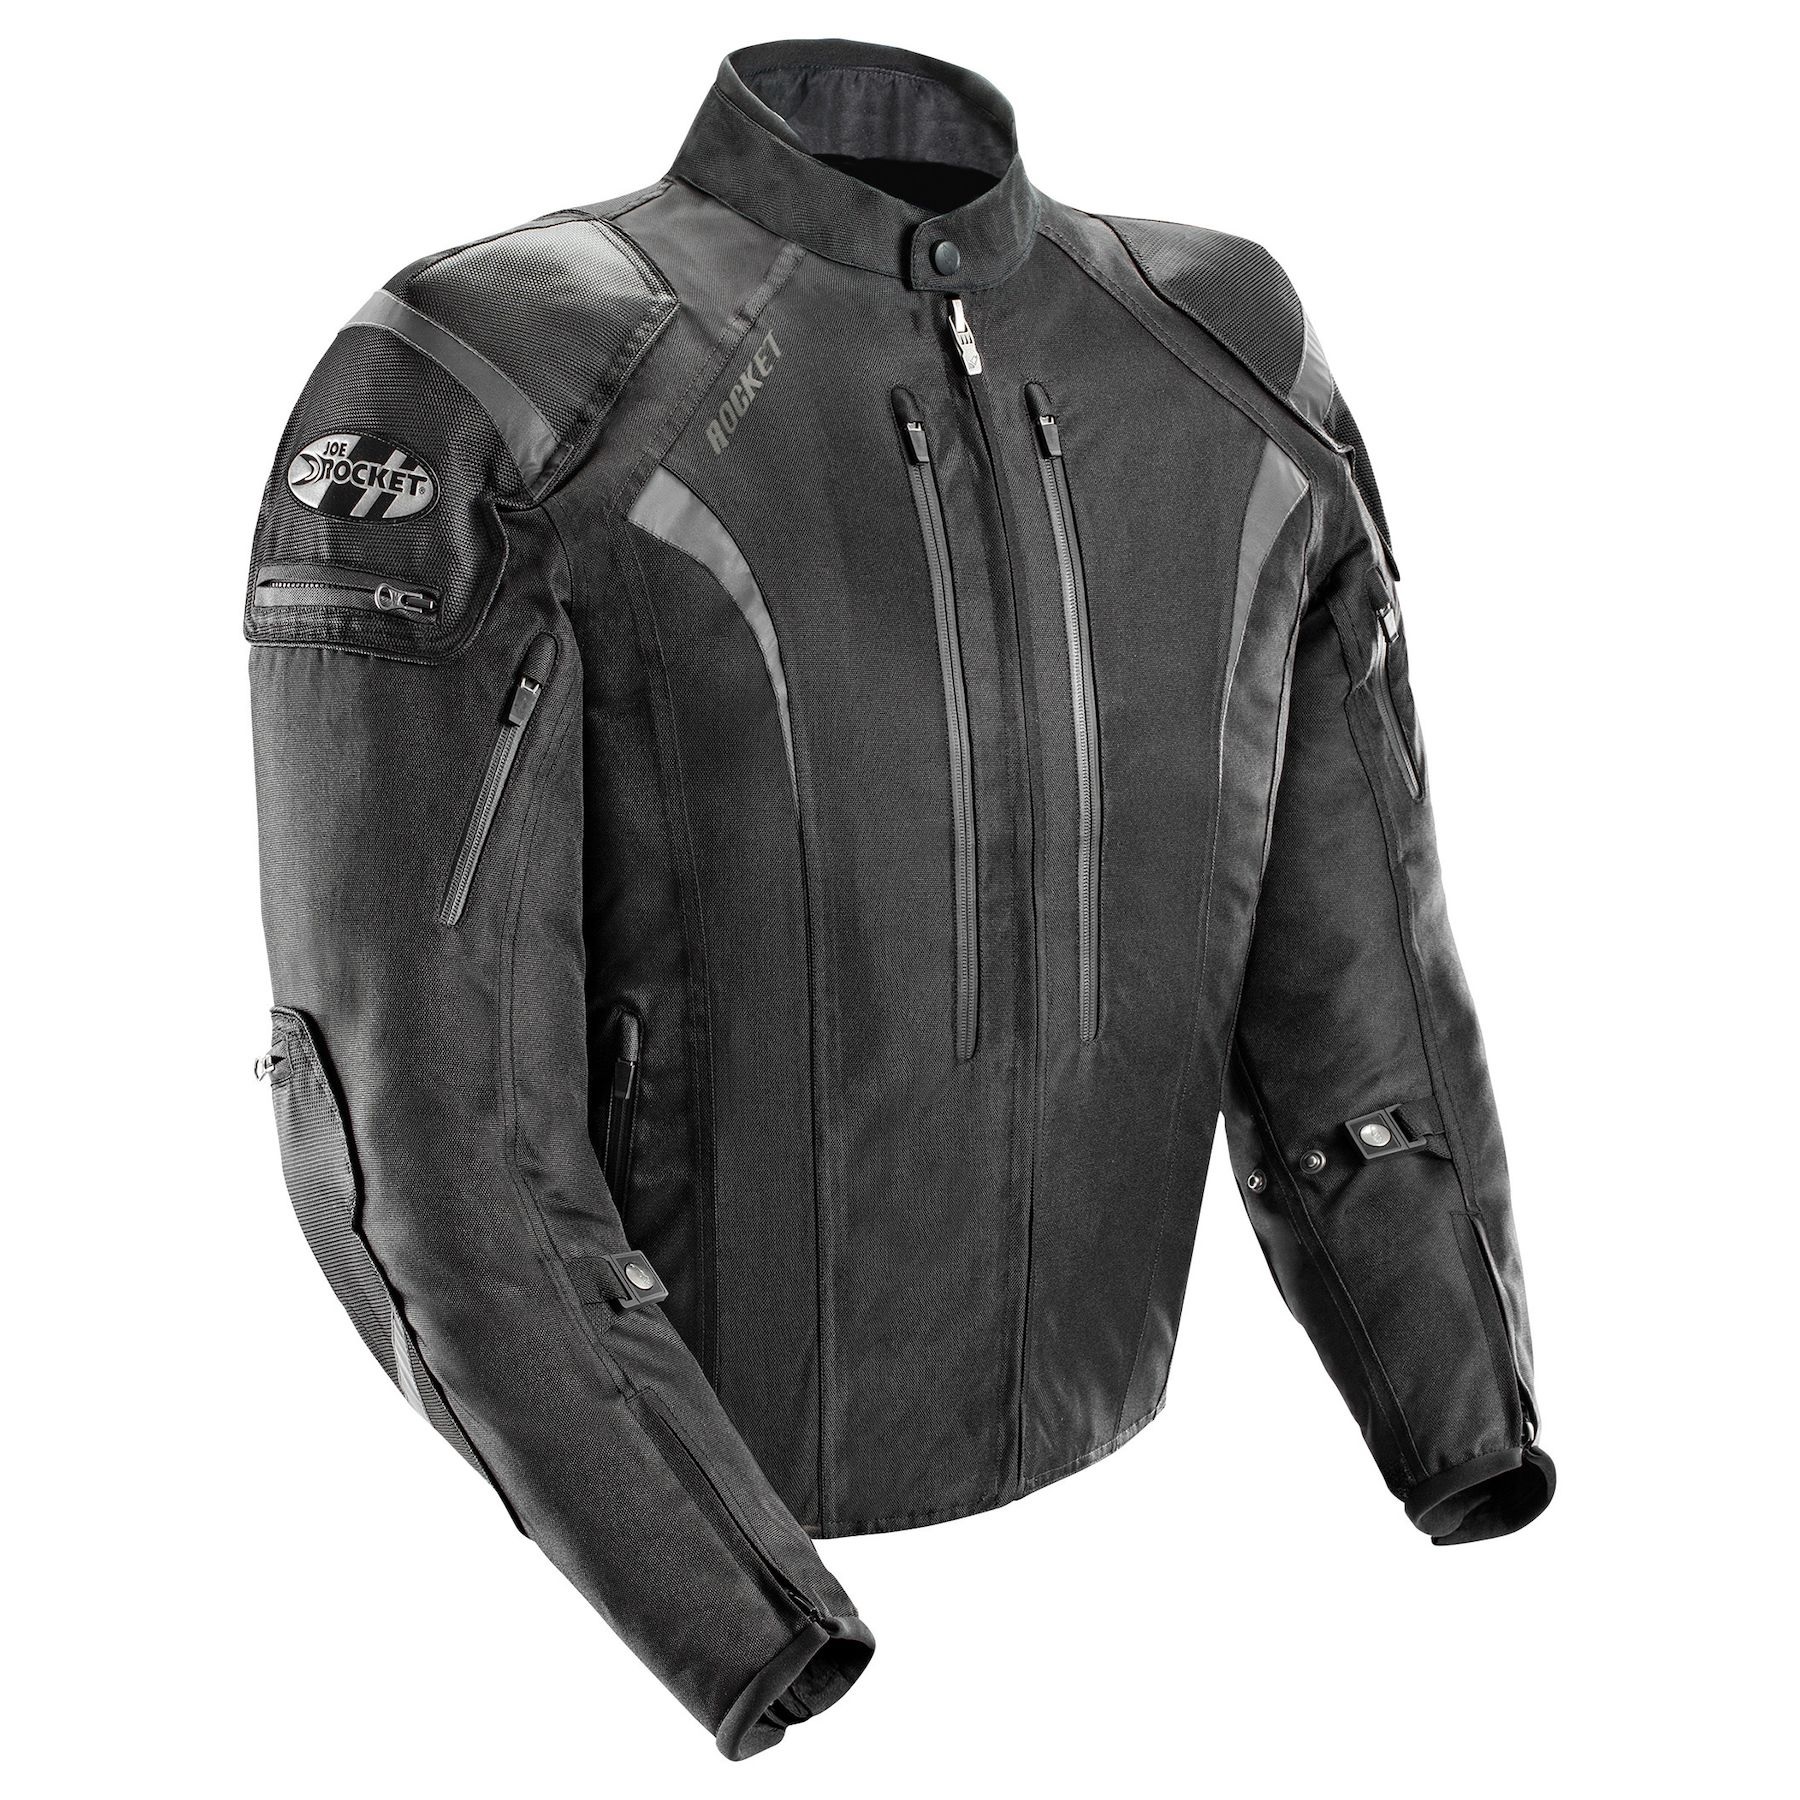 The Best Motorcycle Jackets You Can, Best Leather Motorcycle Jackets Uk